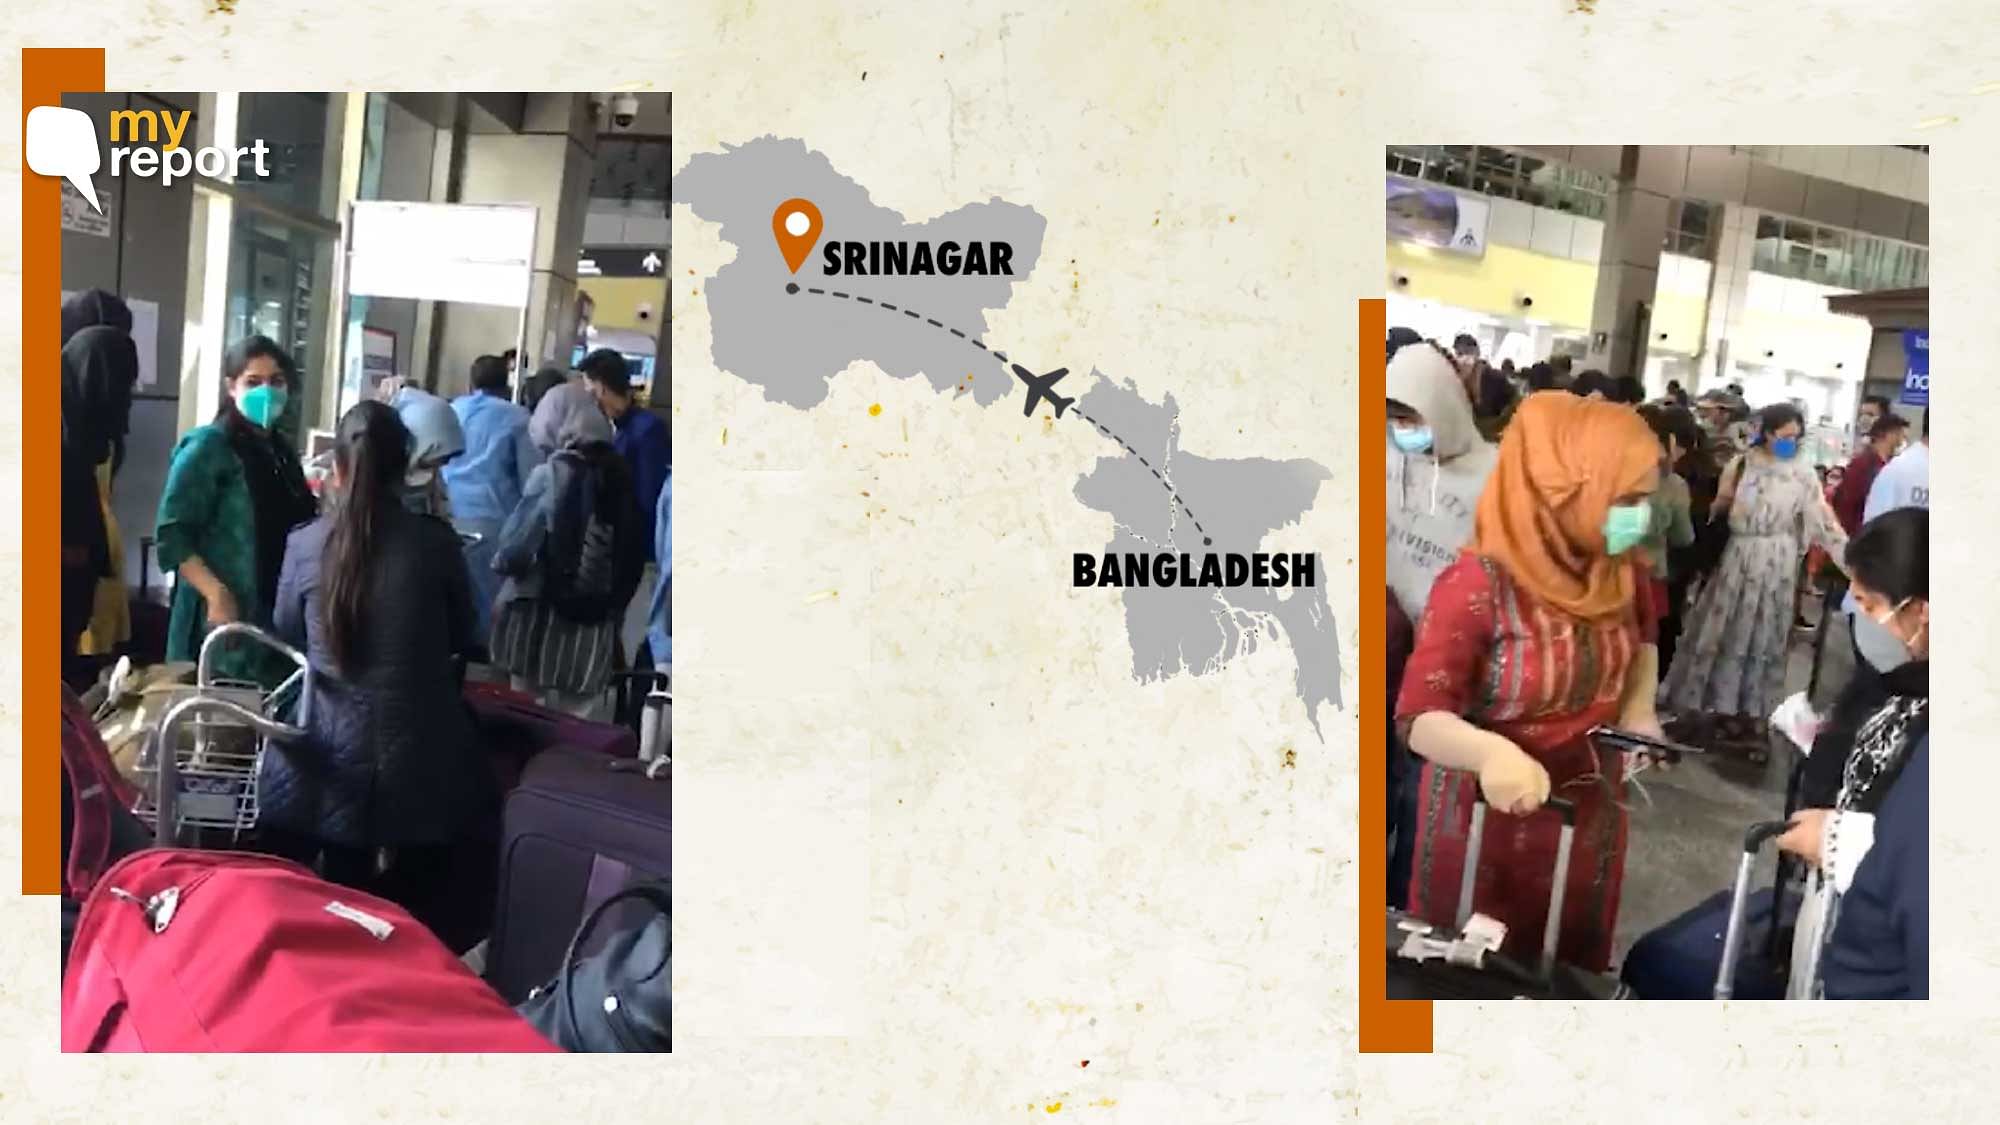 Several passengers had to wait hours at Srinagar Airport before being taken to an unknown quarantine facility.